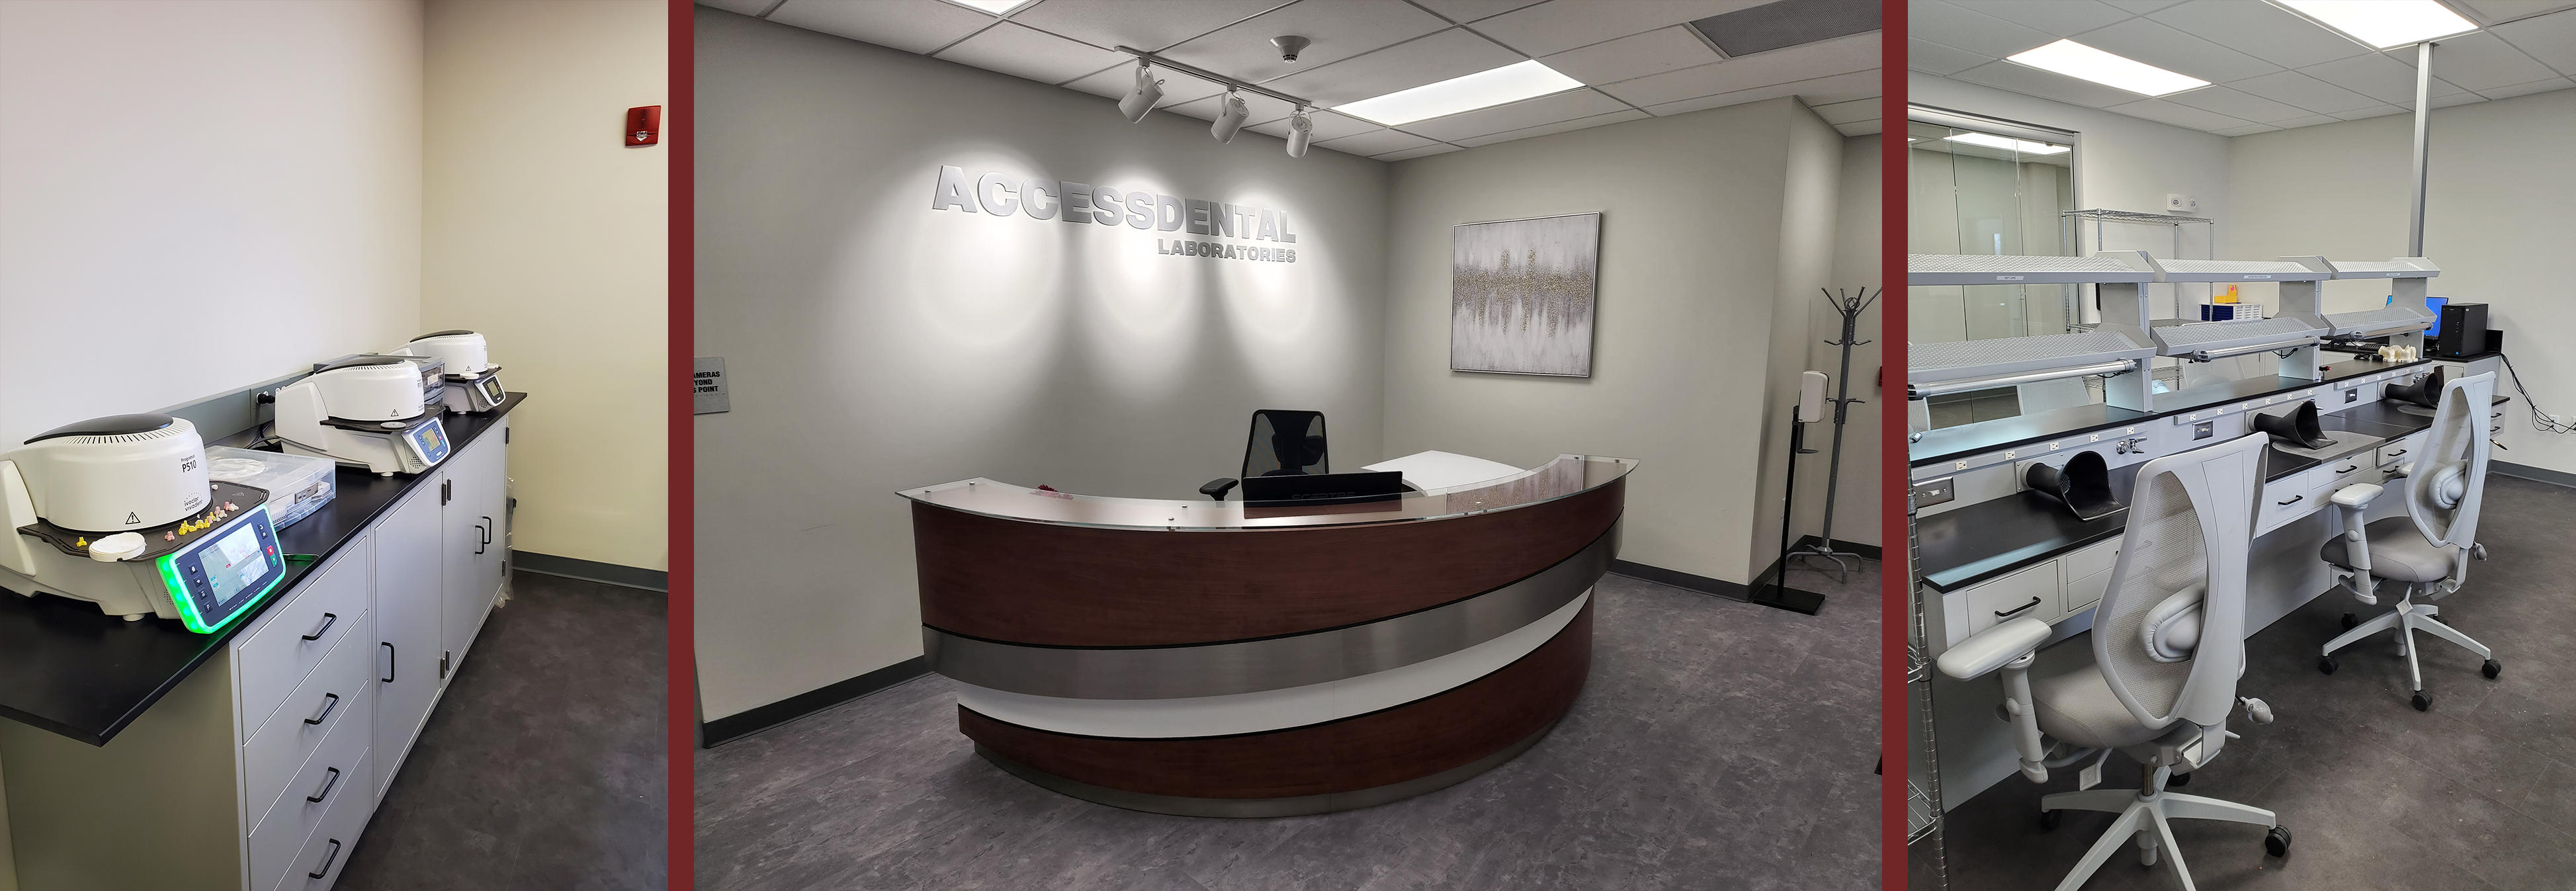 ACCESS DENTAL LAB CHOSE HANDLER FOR ITS NEW FULL LAB HEADQUARTERS:  AS FEATURED IN JDT MAGAZINE